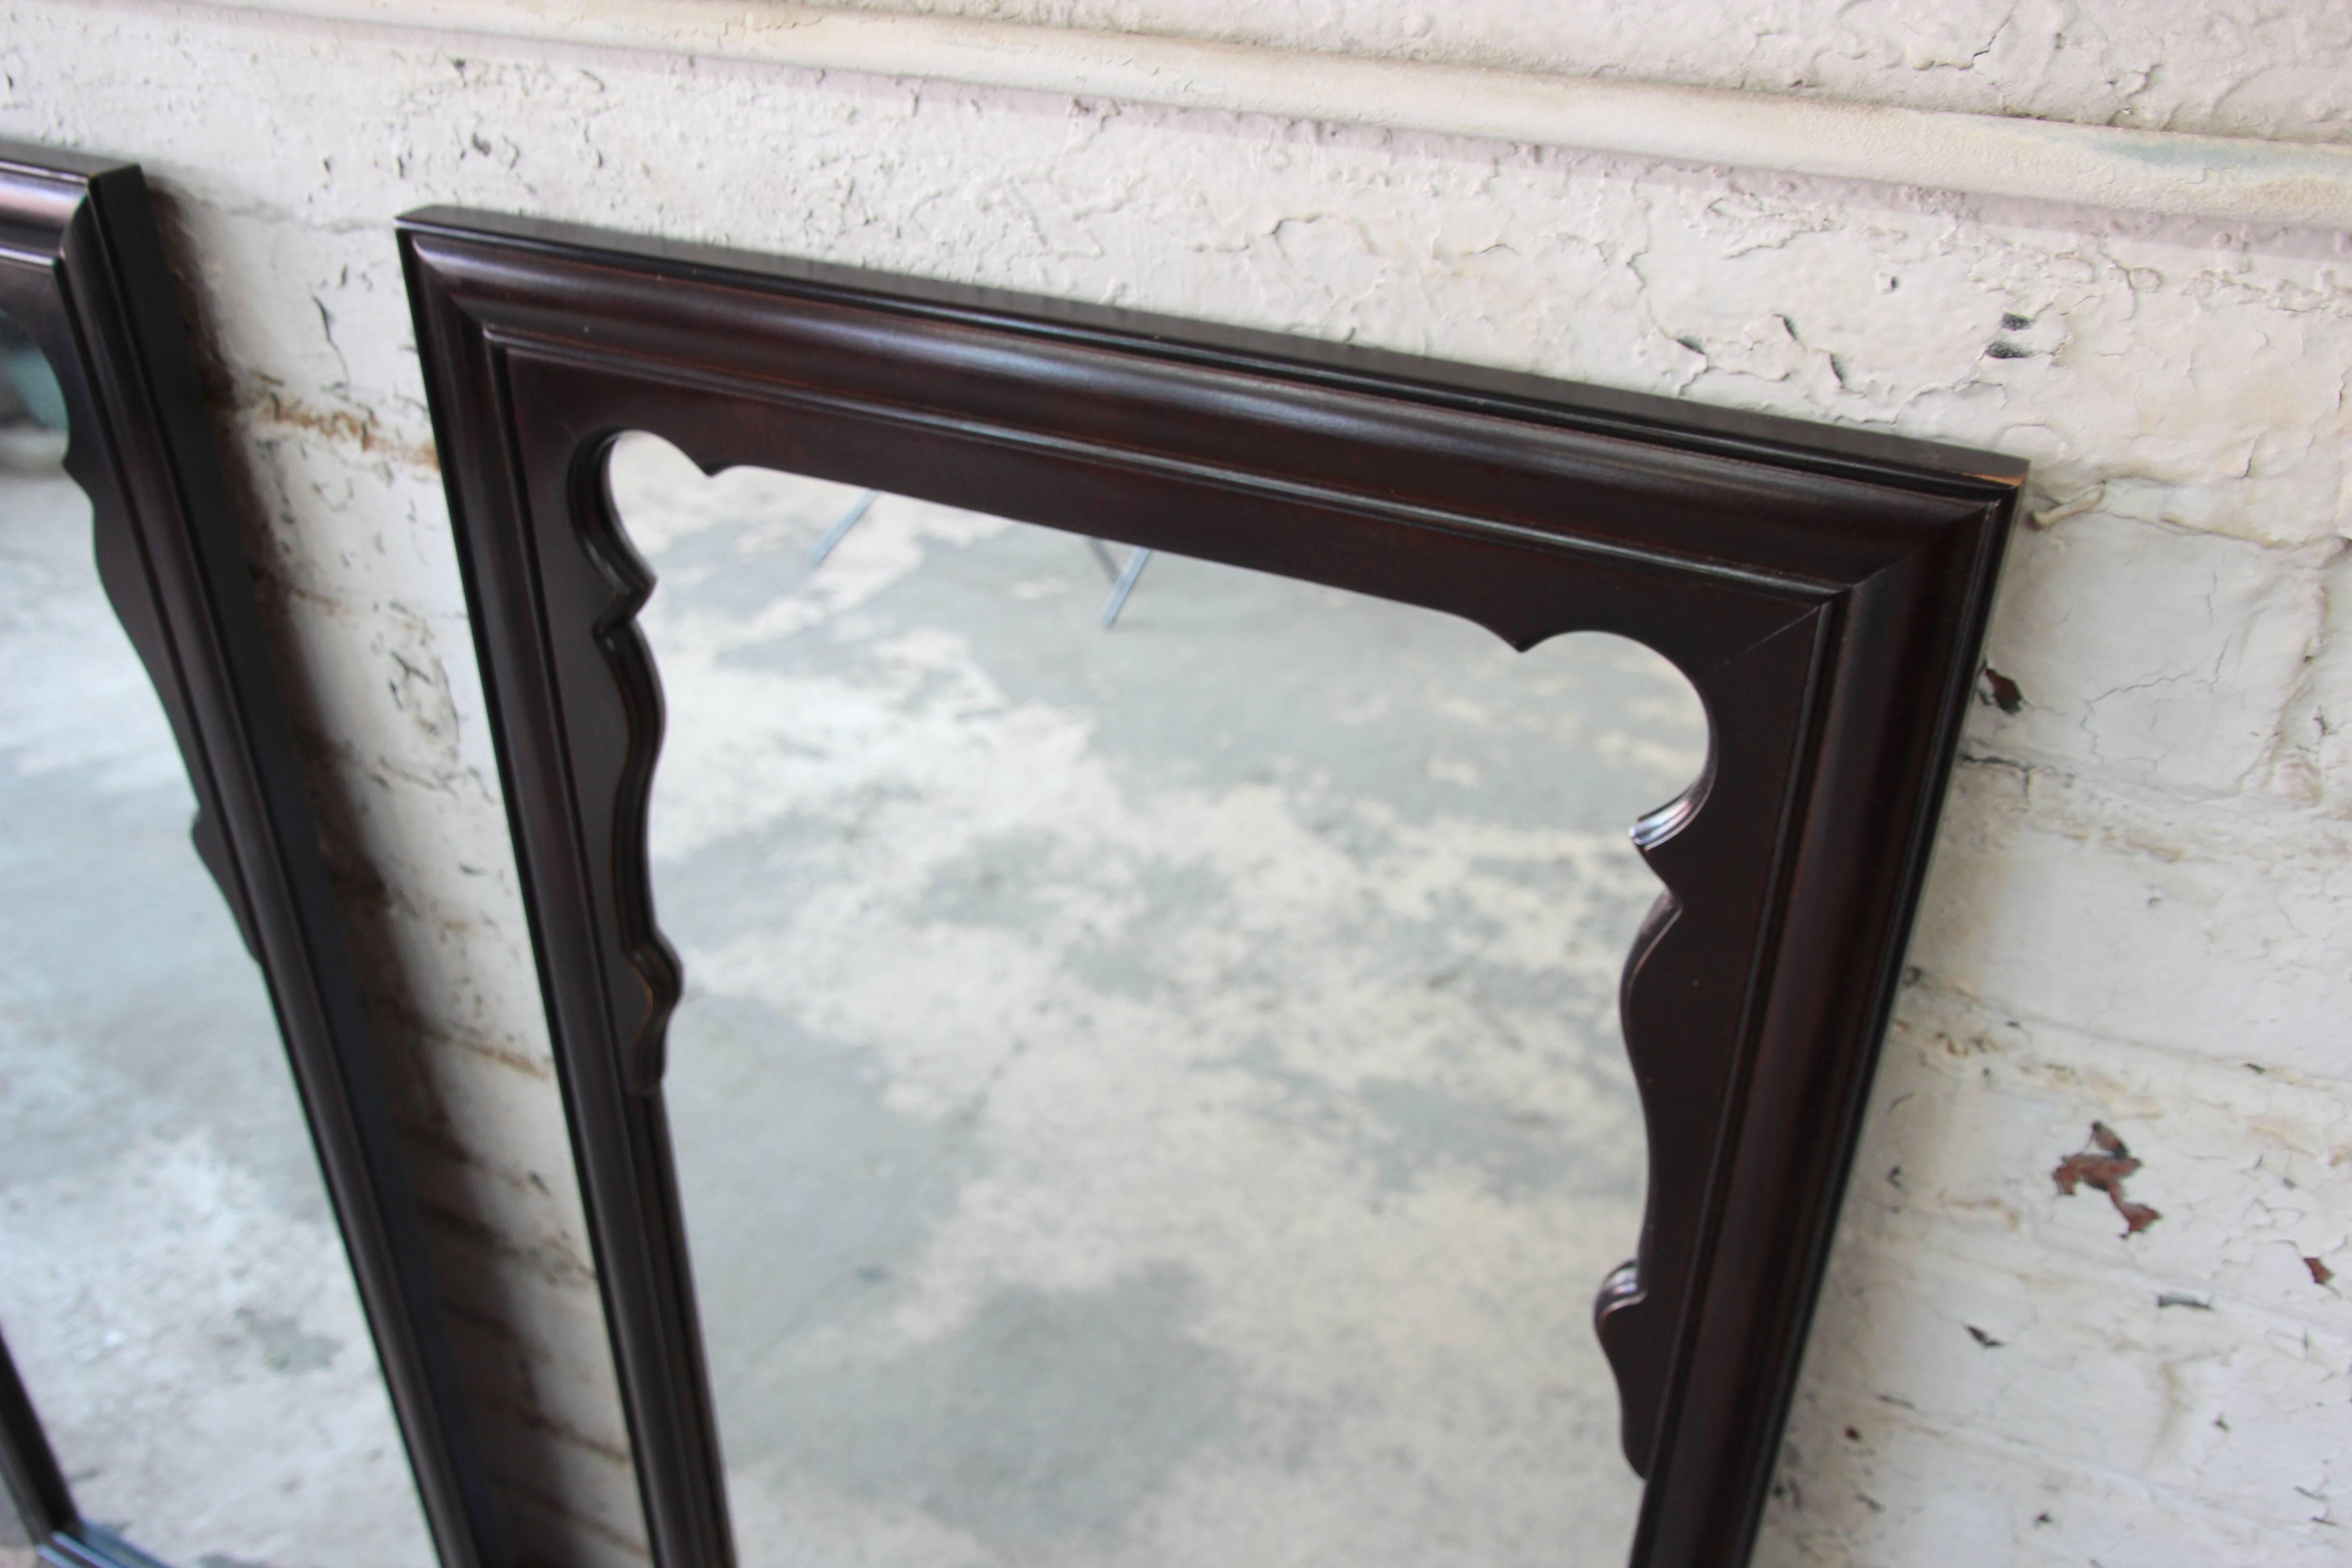 A beautiful pair of midcentury chinoiserie mirrors. The mirrors feature solid wood frames in a dark brown lacquer, with subtle Asian design. The mirrors are from the Chin Hua collection by Century Furniture. They are in very good original condition,